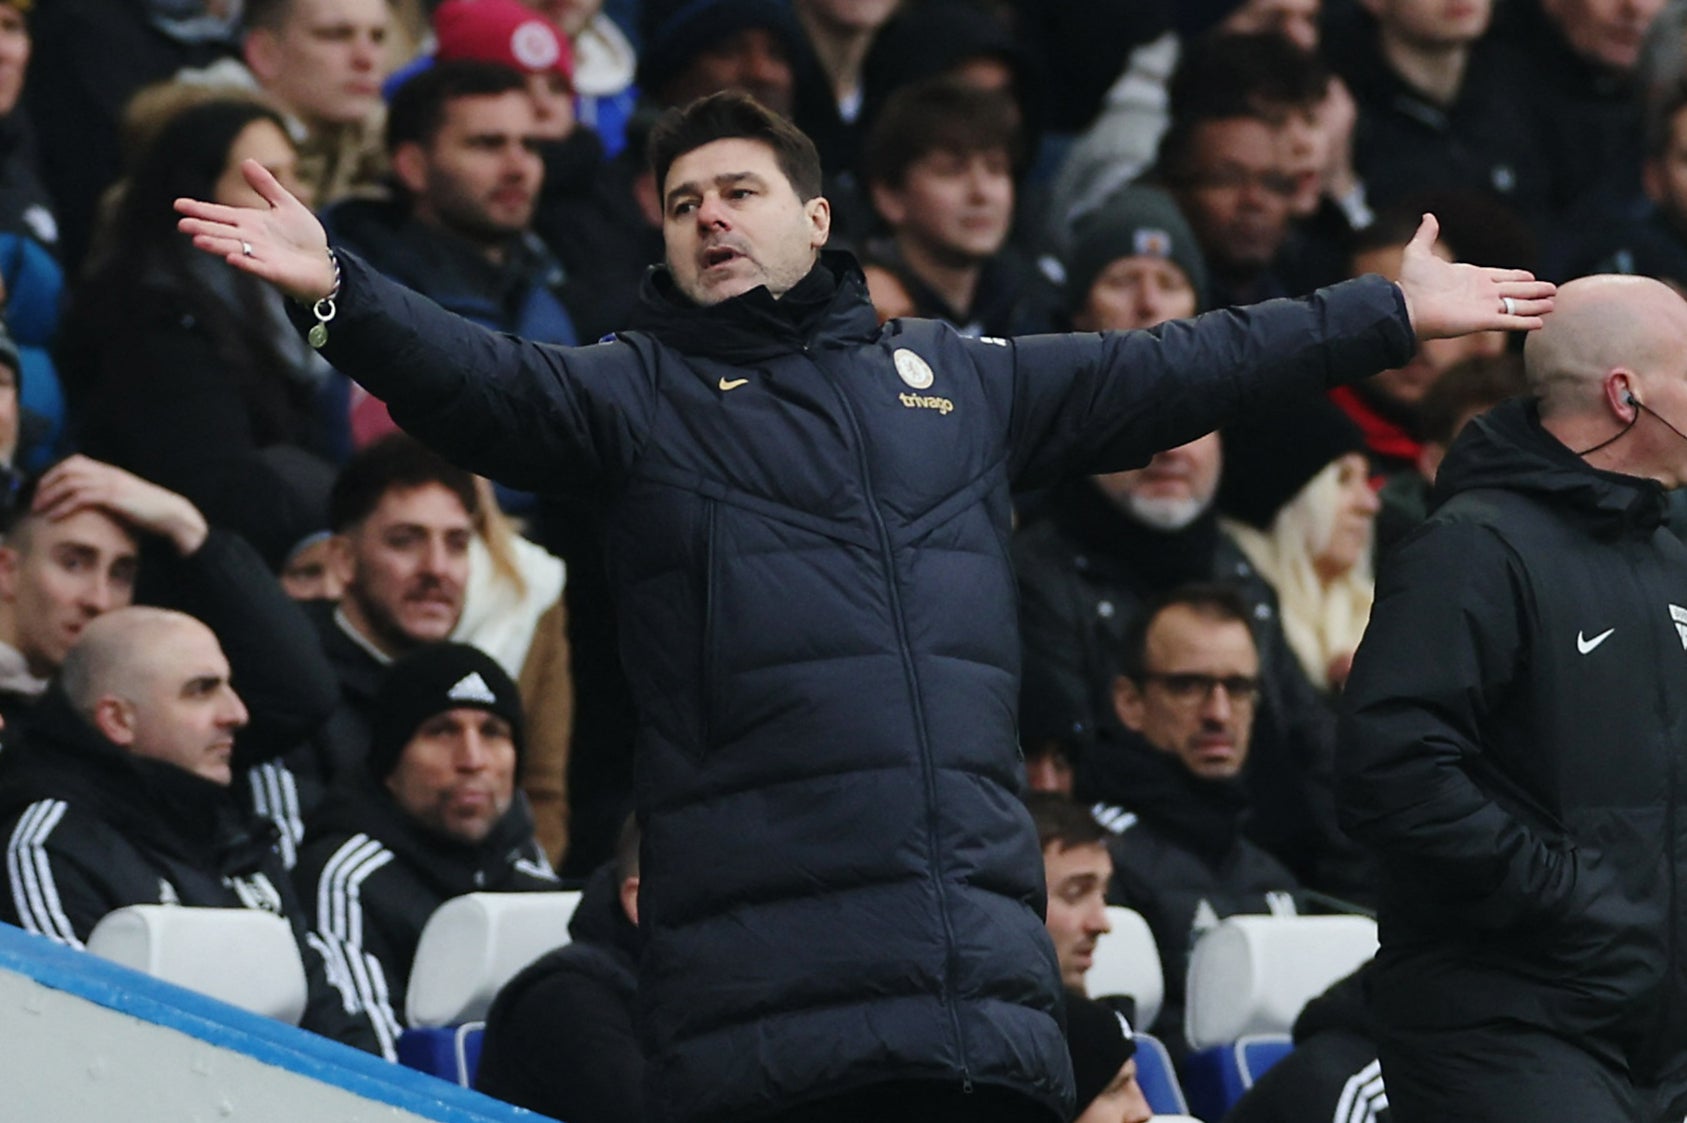 Mauricio Pochettino hinted something affected his Chelsea side